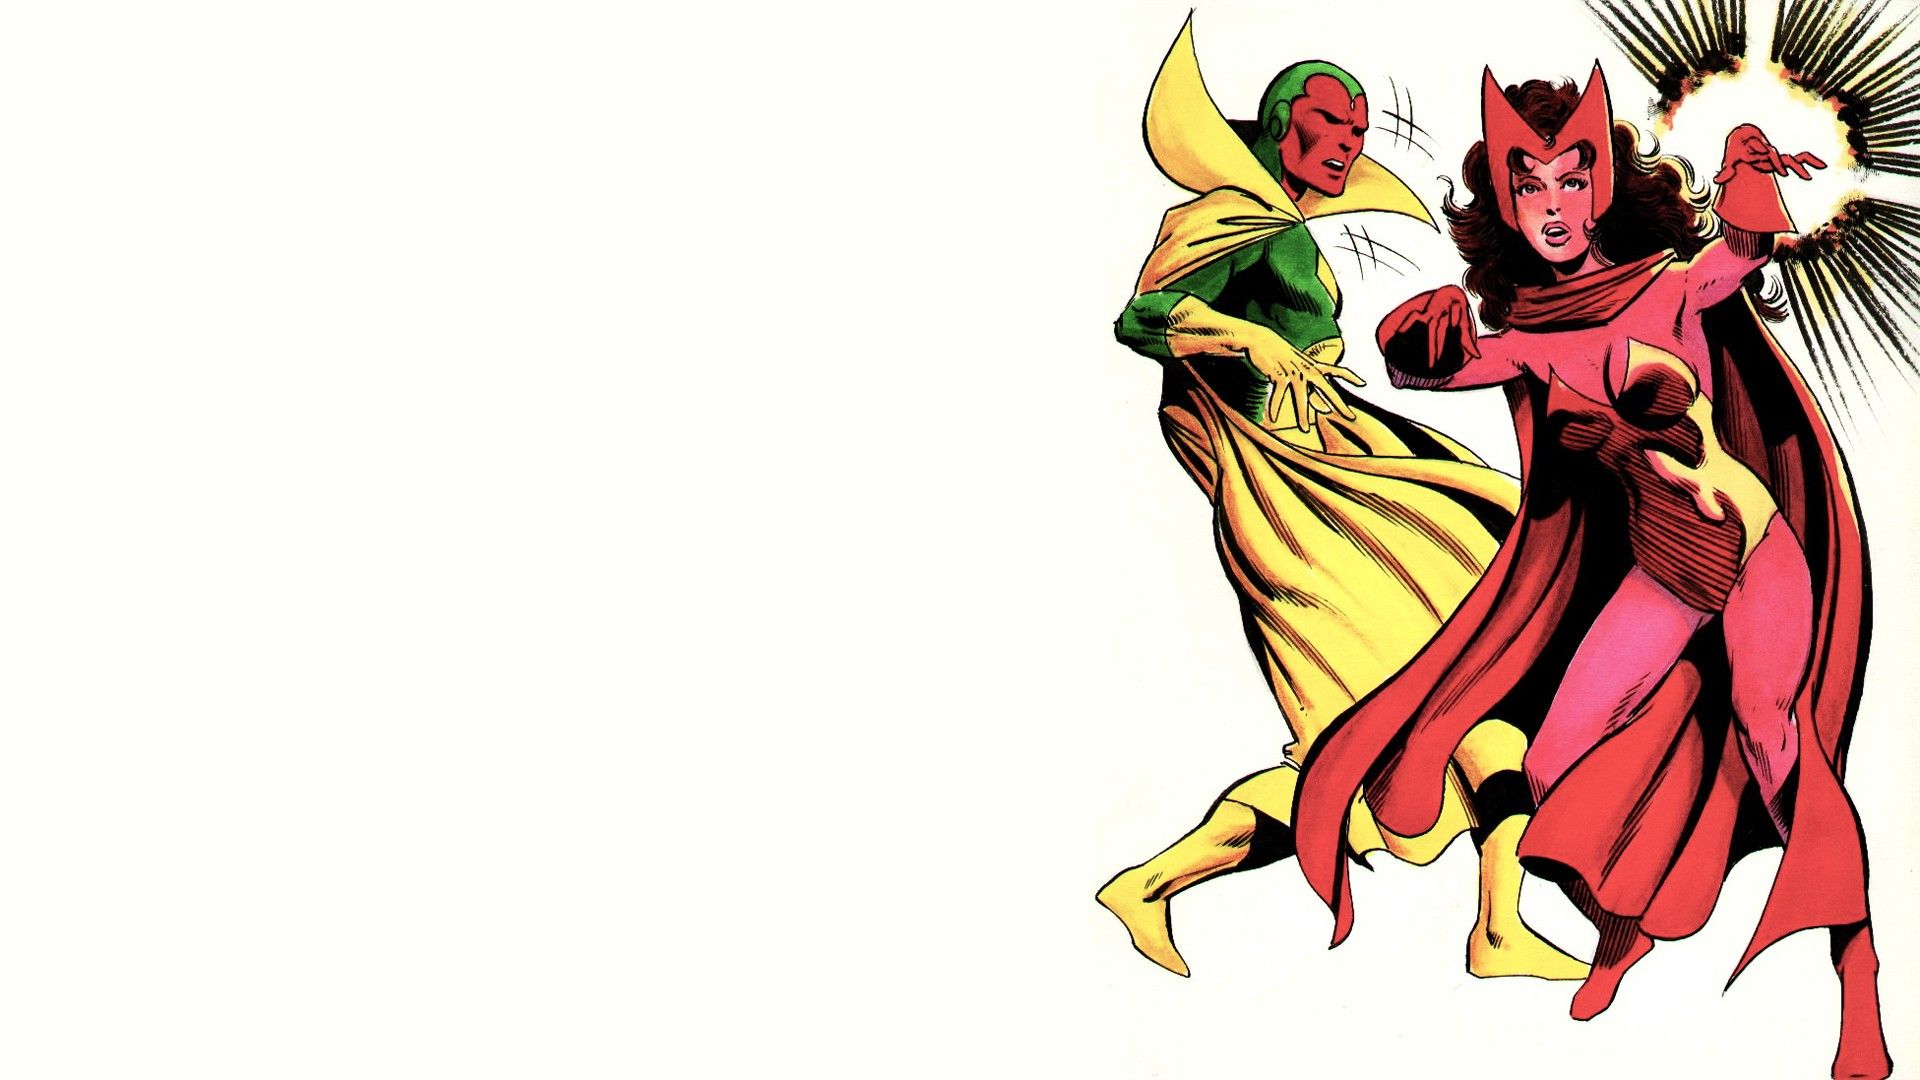 Comics Marvel Comics Scarlet Witch white background The Vision (Comics) wallpaperx1080